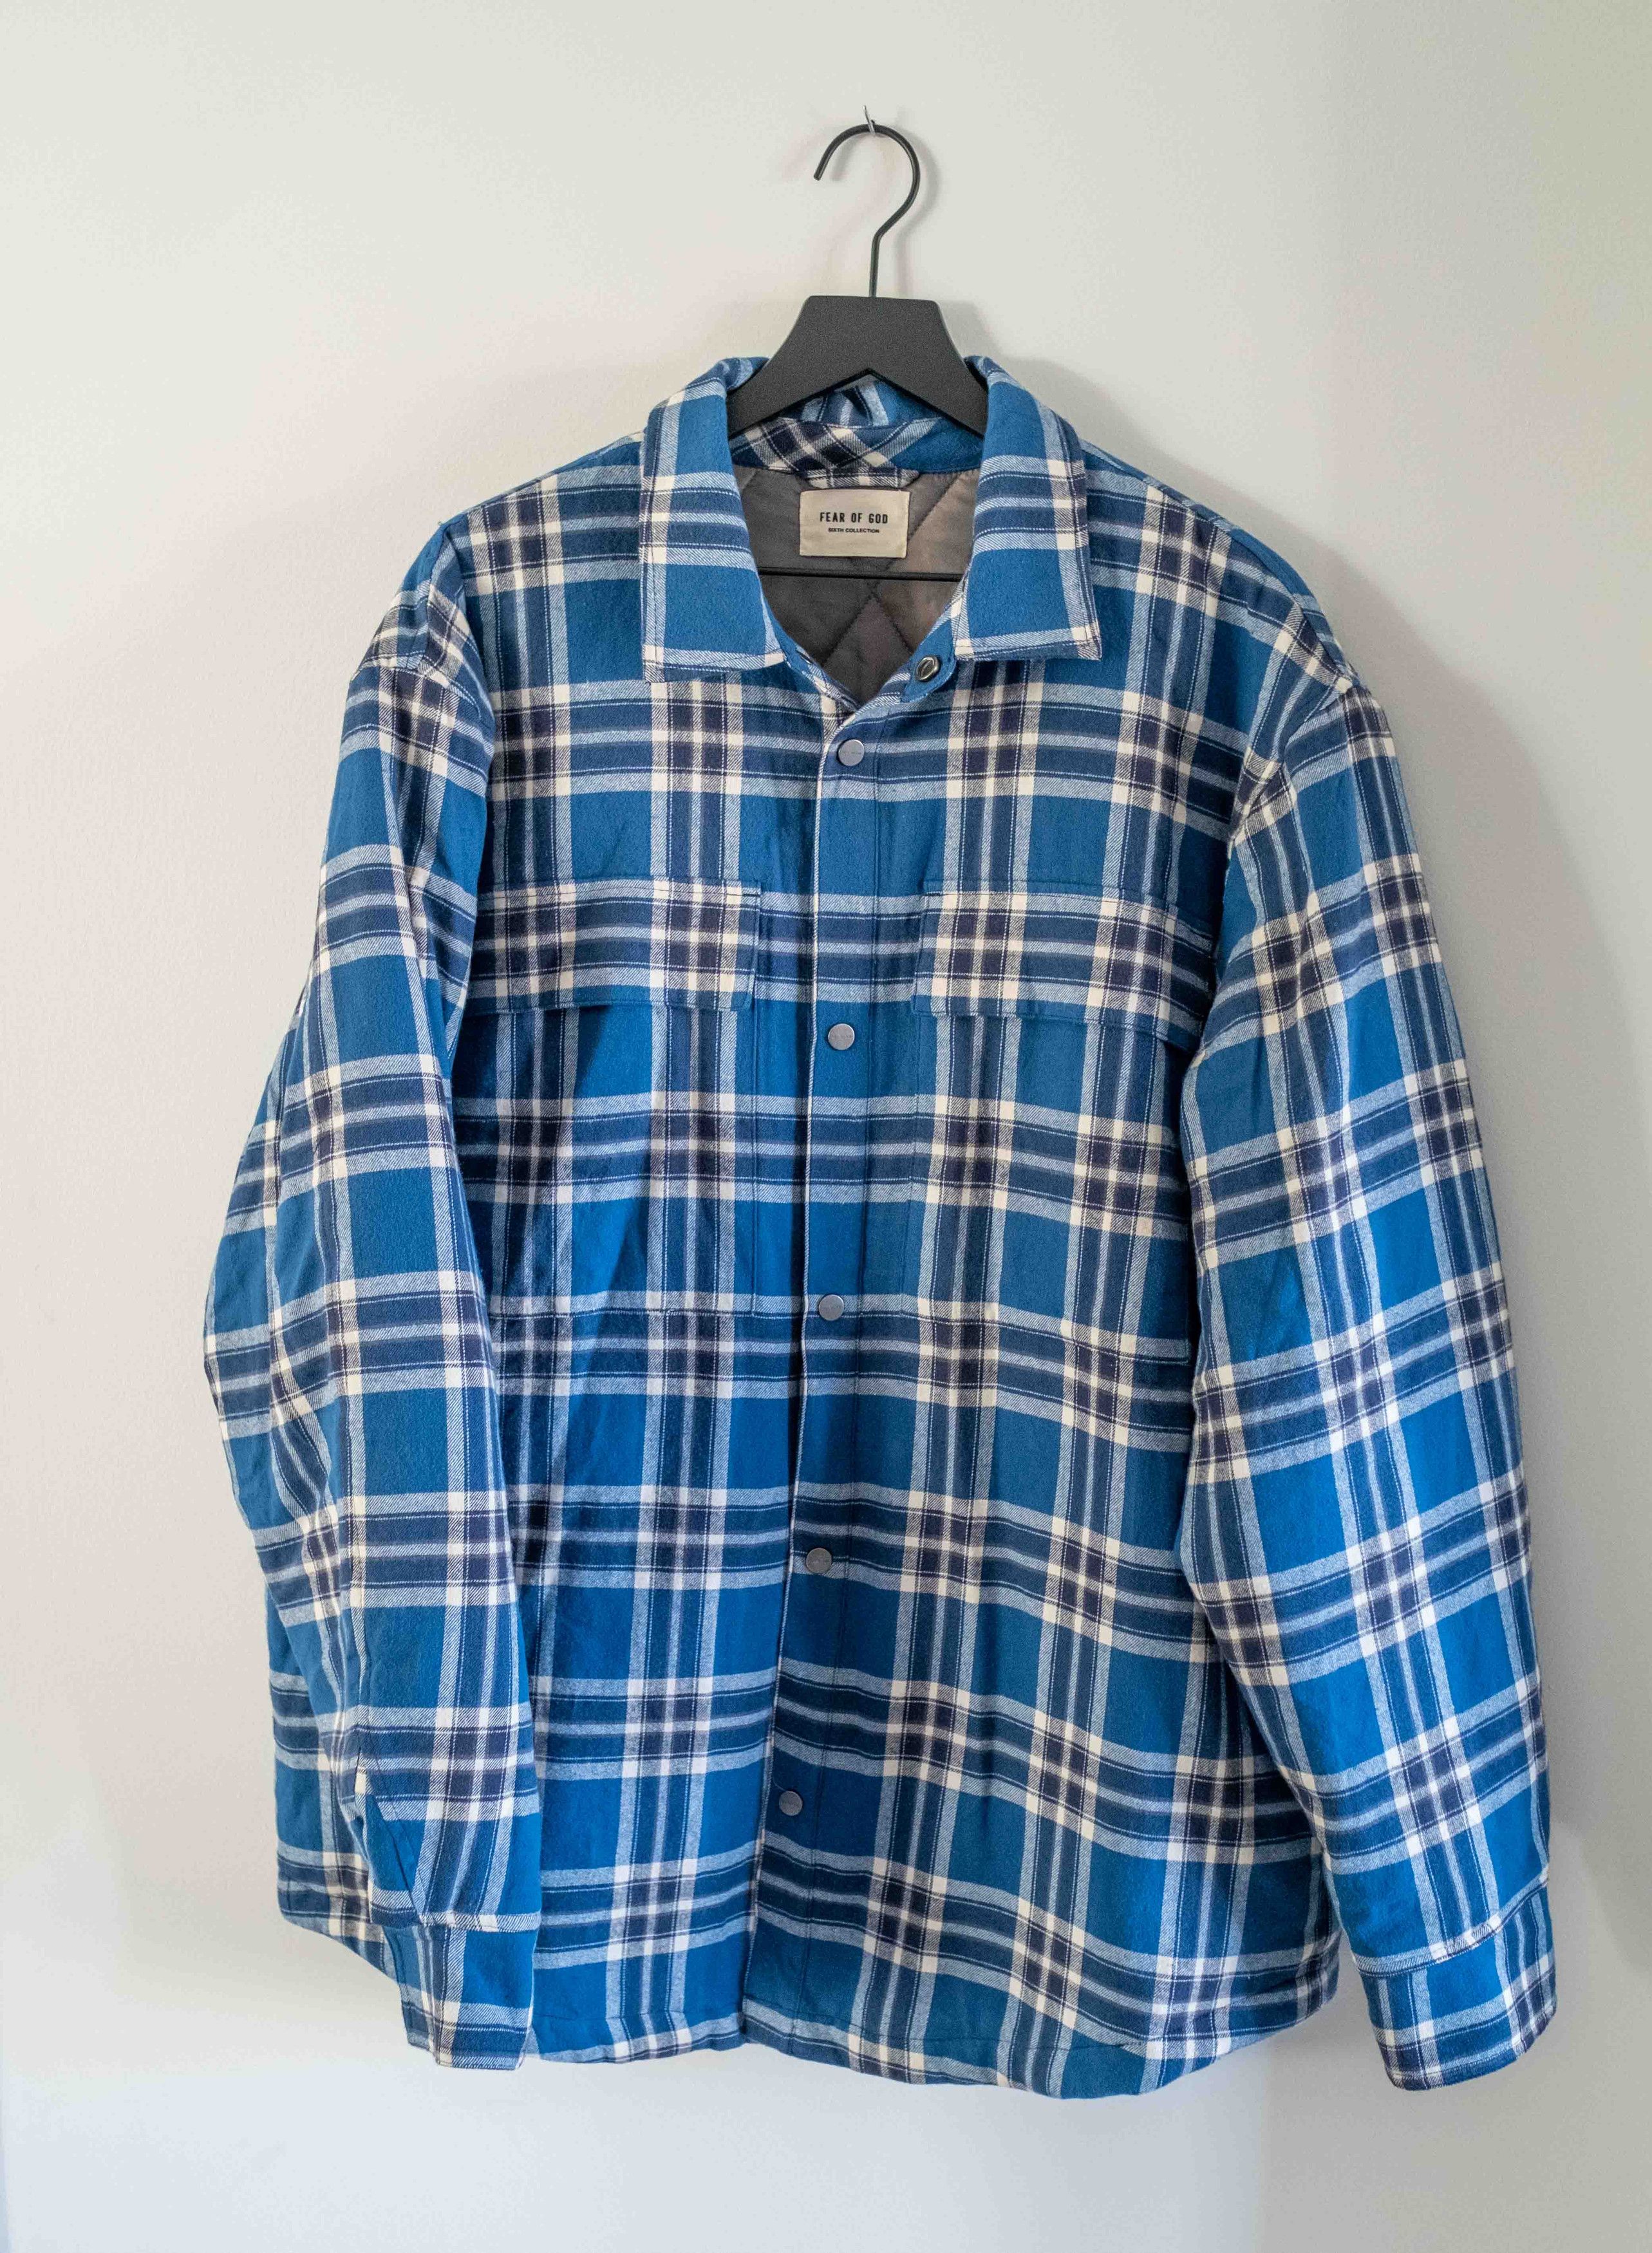 Fear of God 6th Collection Blue Flannel | Grailed